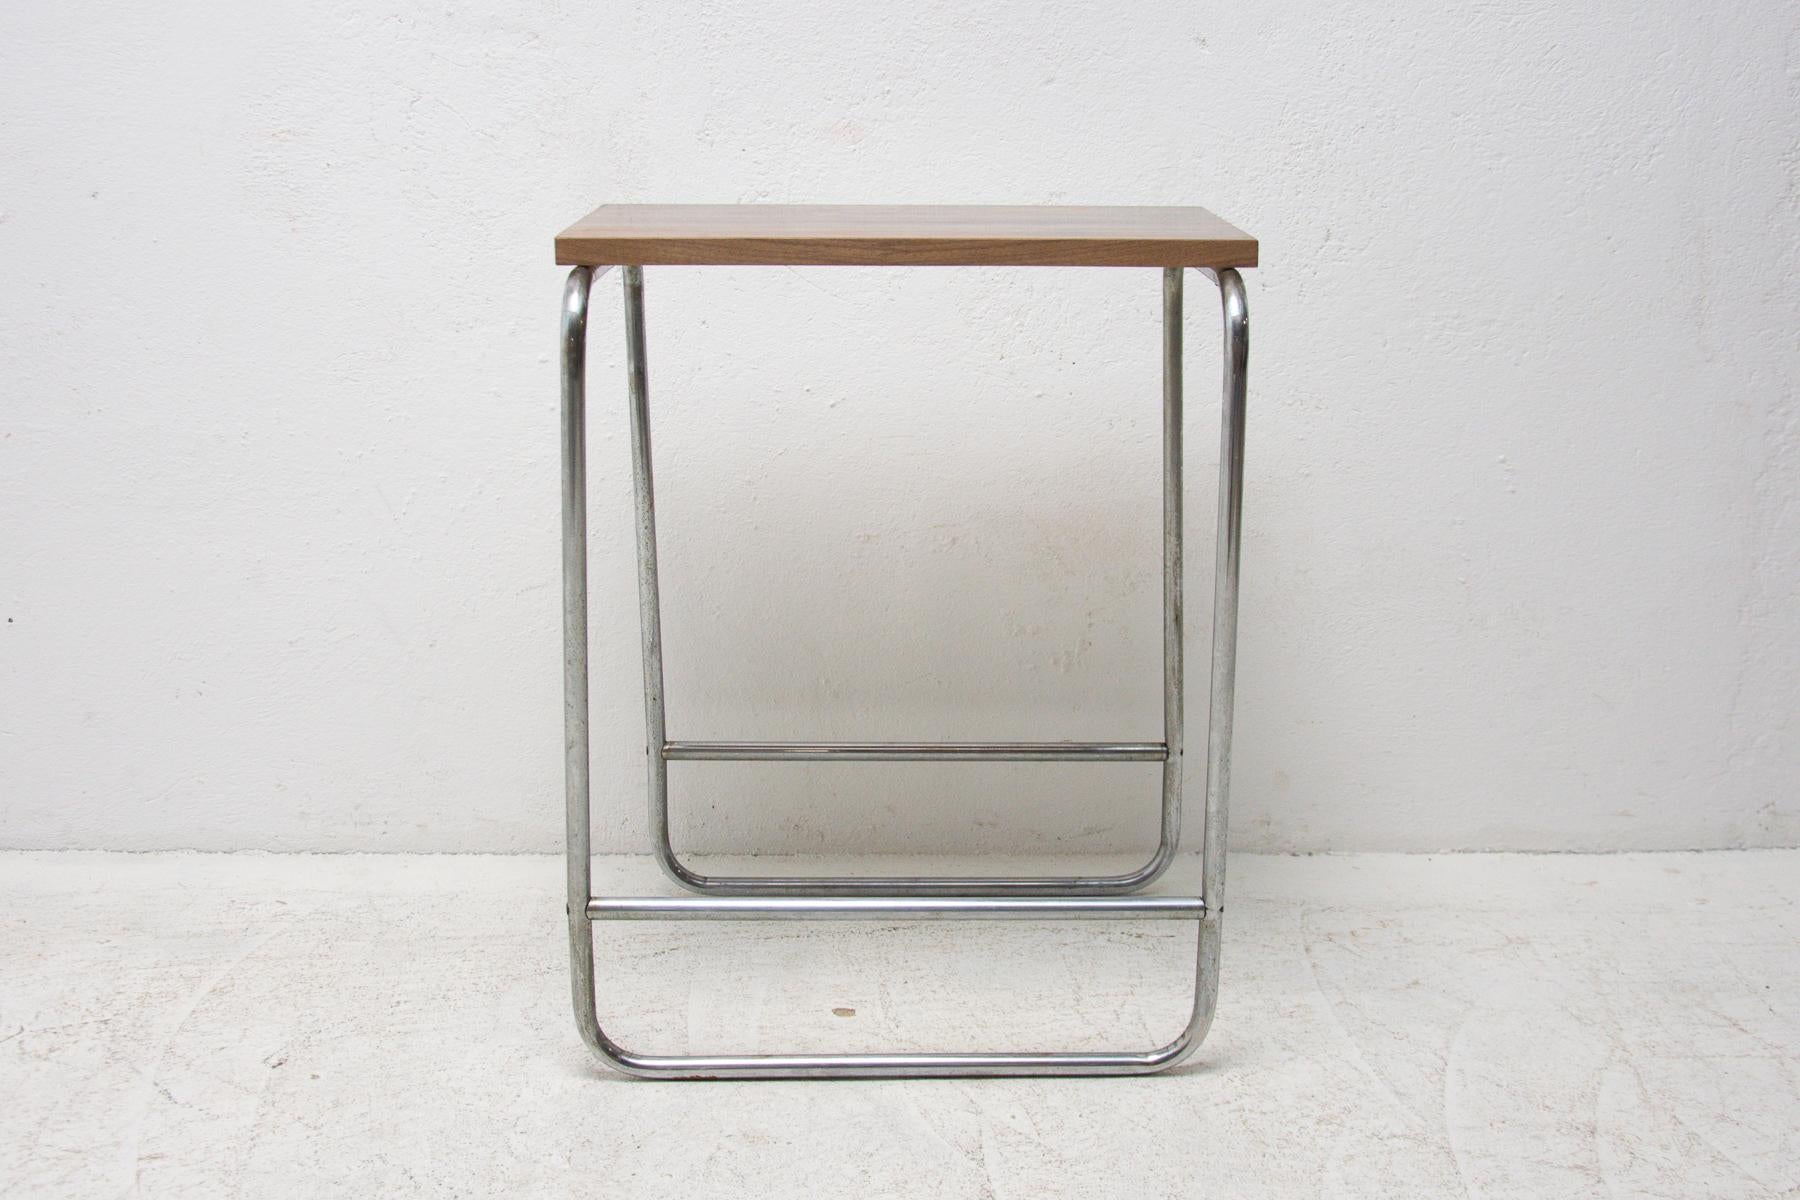 Chrome side table in the style of Marcel Breuer, made during the Bauhaus period in the former Czechoslovakia, most likely in the 1930s.

It features a chromed construction and a walnut top plate.

The table is generally in good vintage